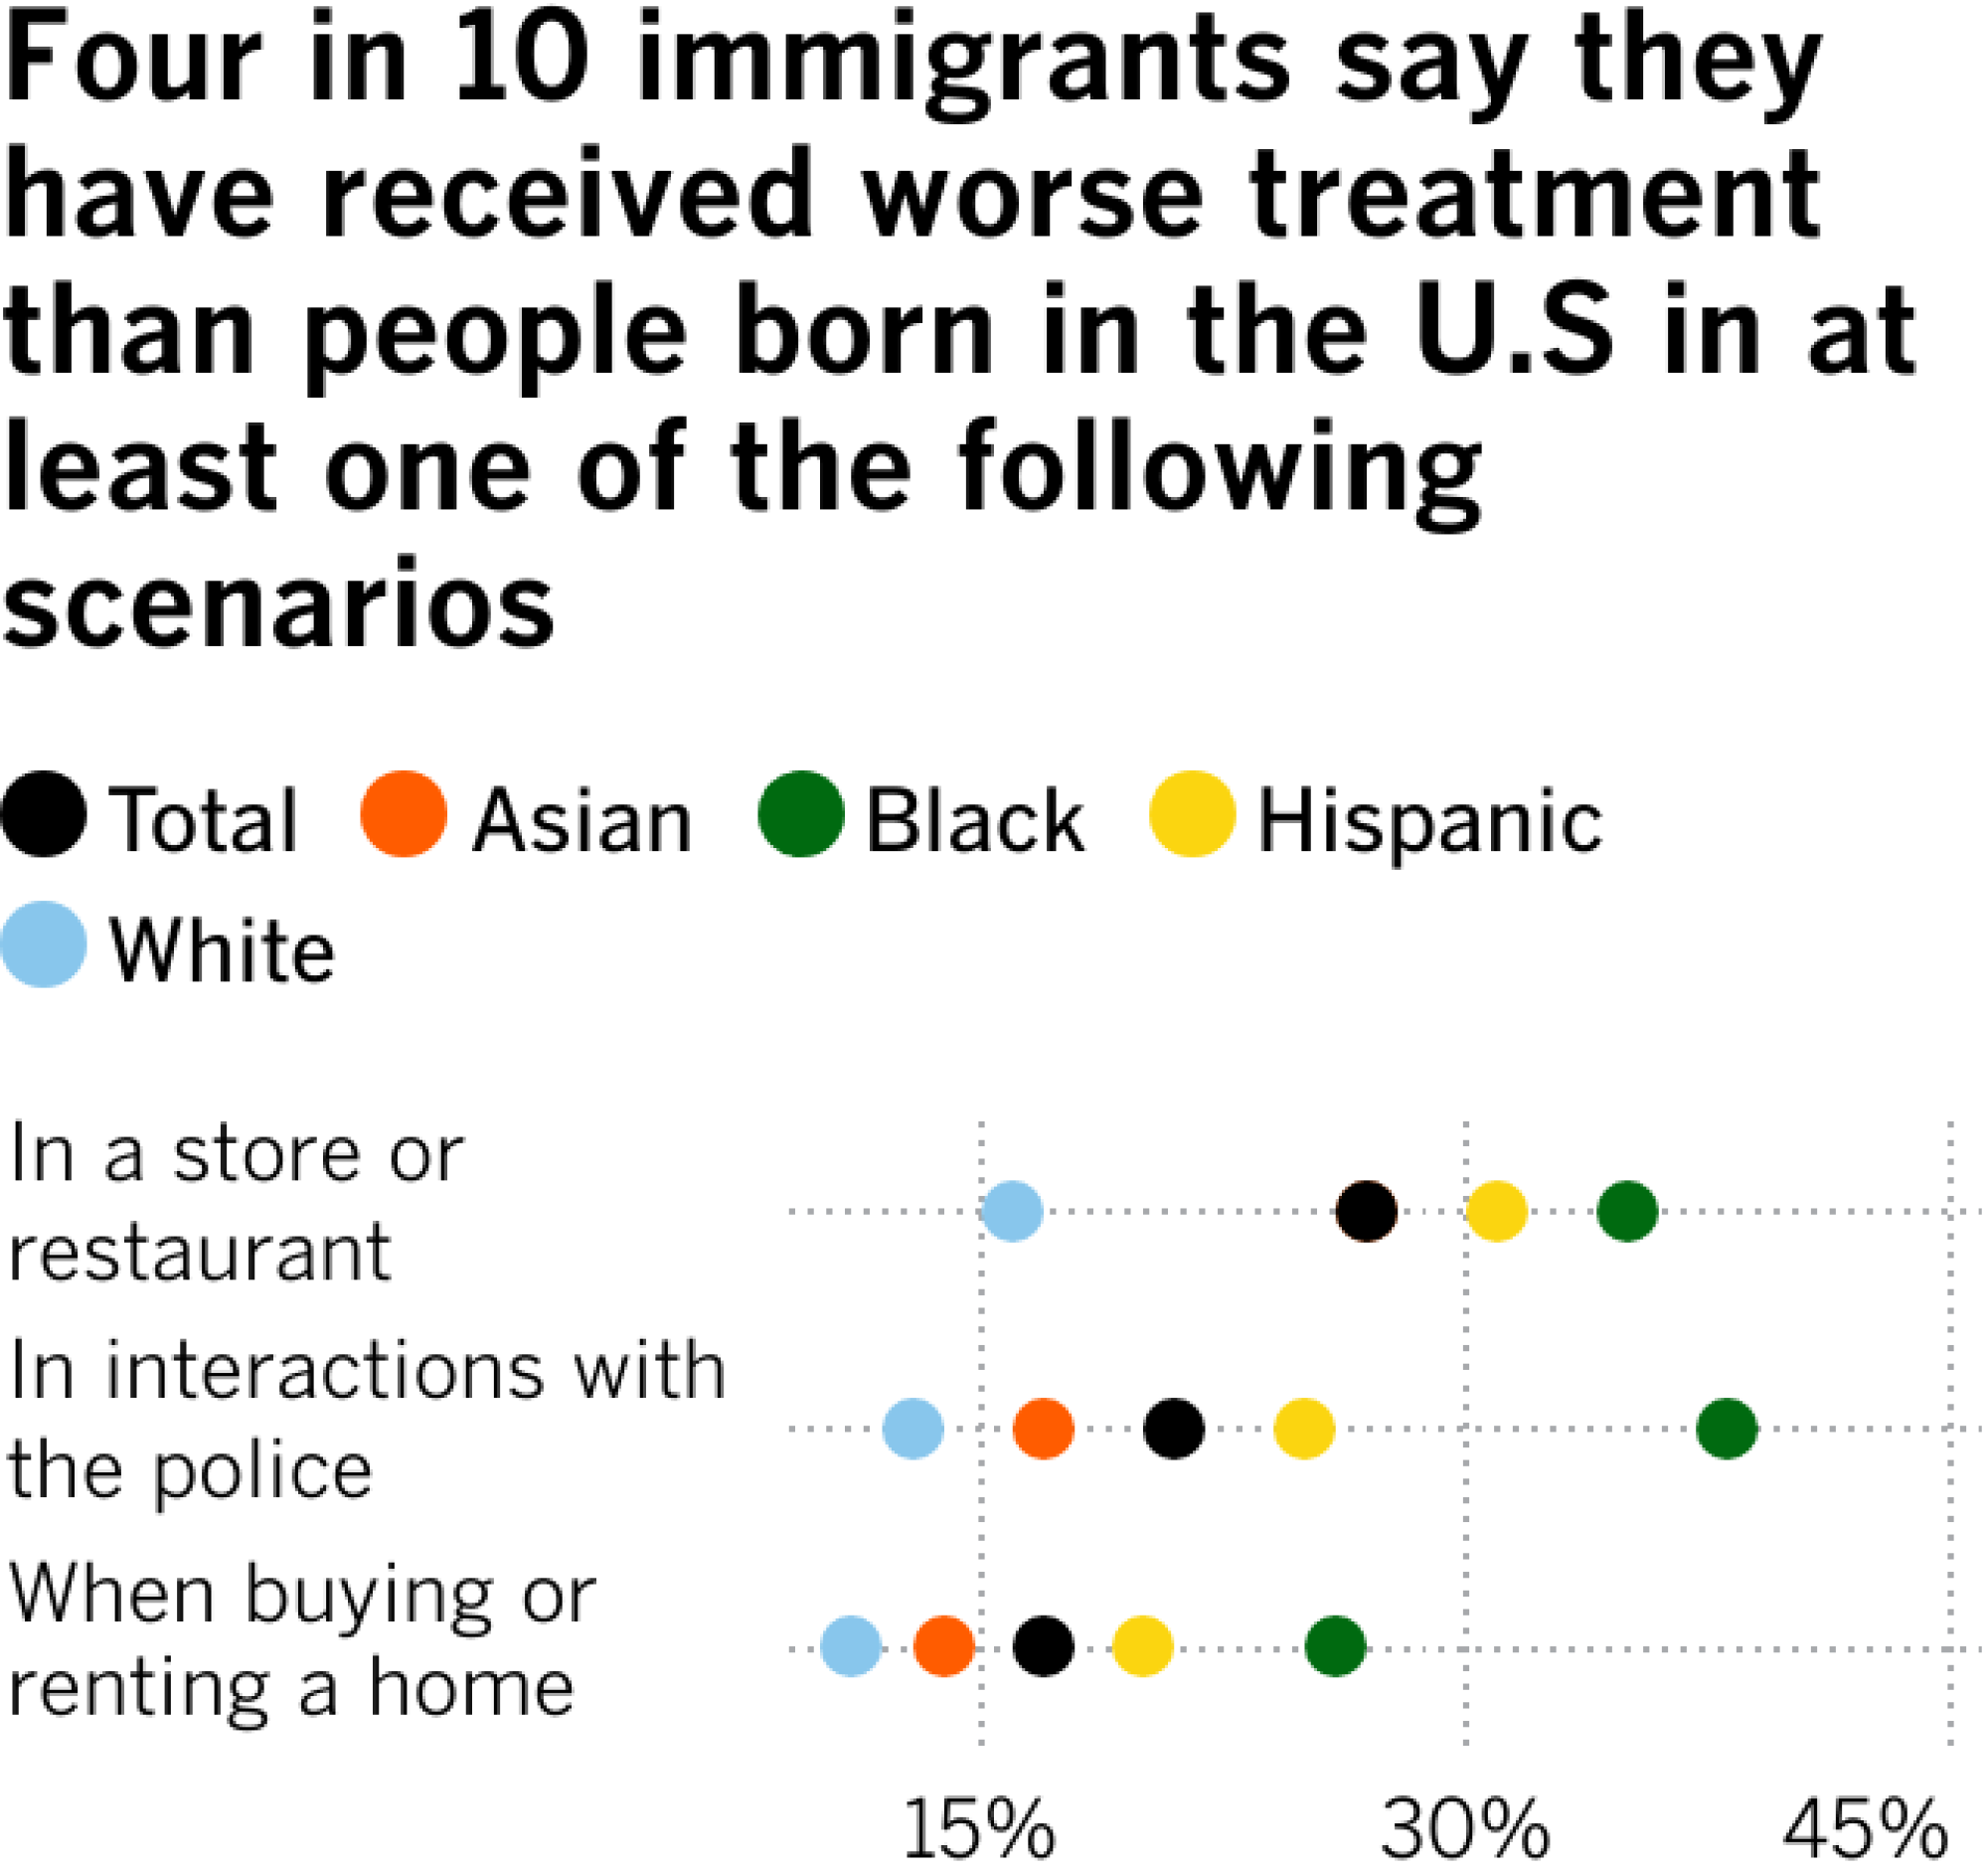 Four in 10 immigrants say they have received worse treatment than people born in the U.S in at least one of the following scenarios